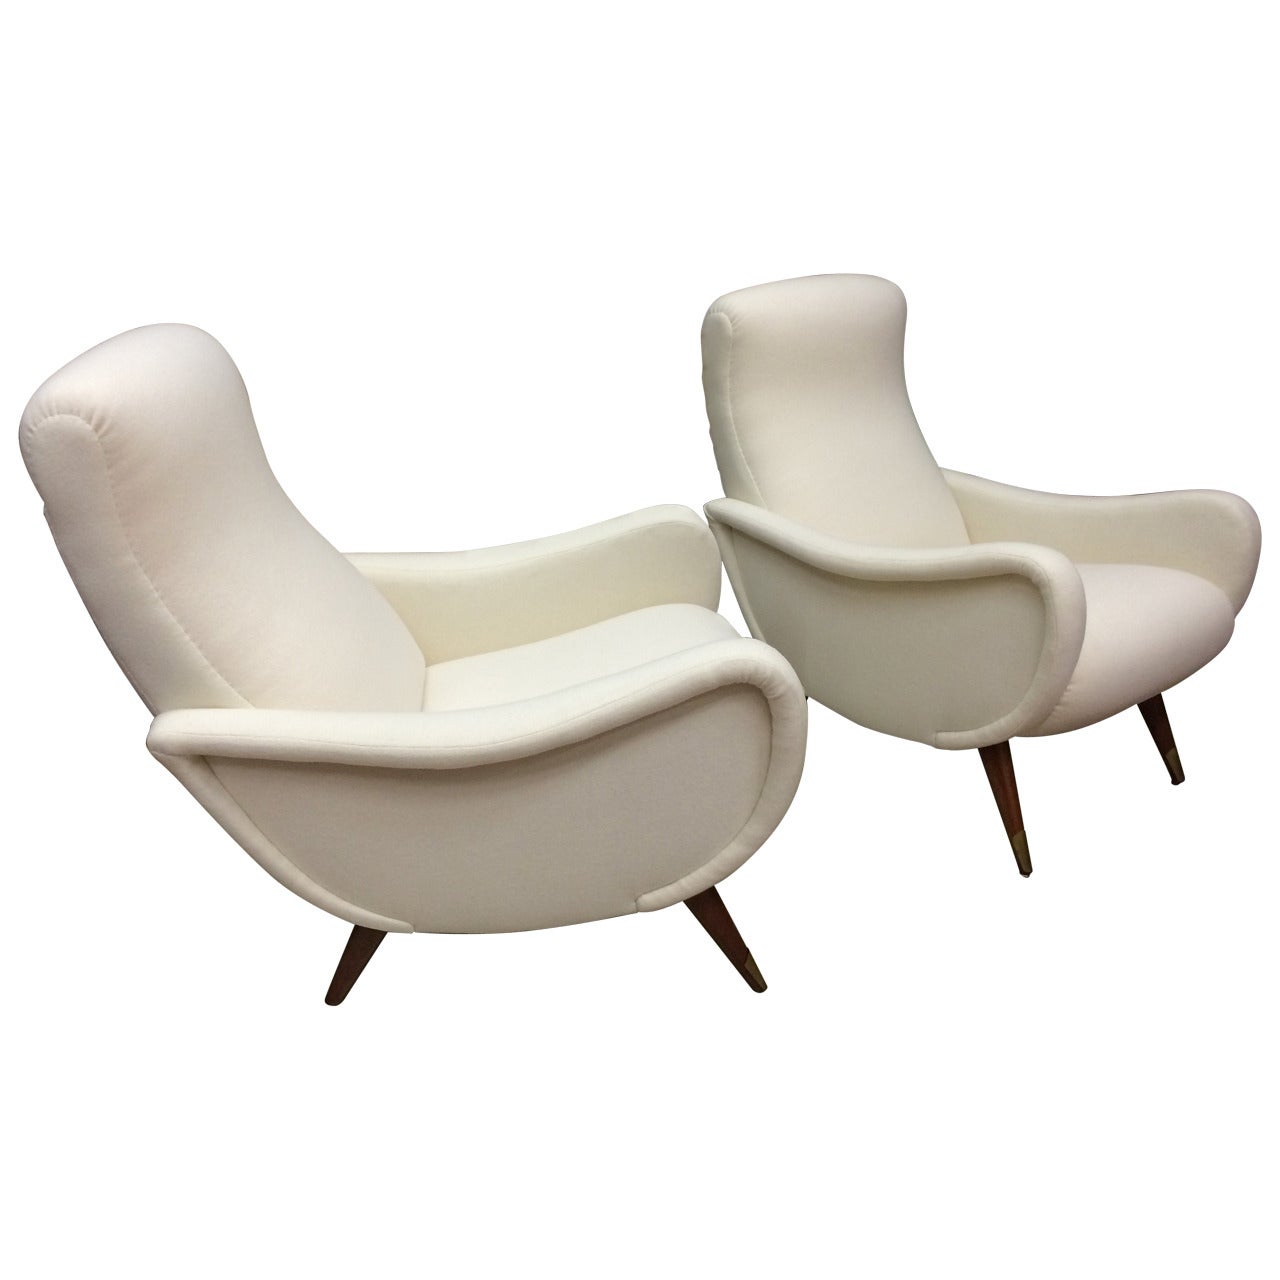 Pair of Italian Chairs in the Style of Marco Zanuso, Re-Covered in Raw White For Sale